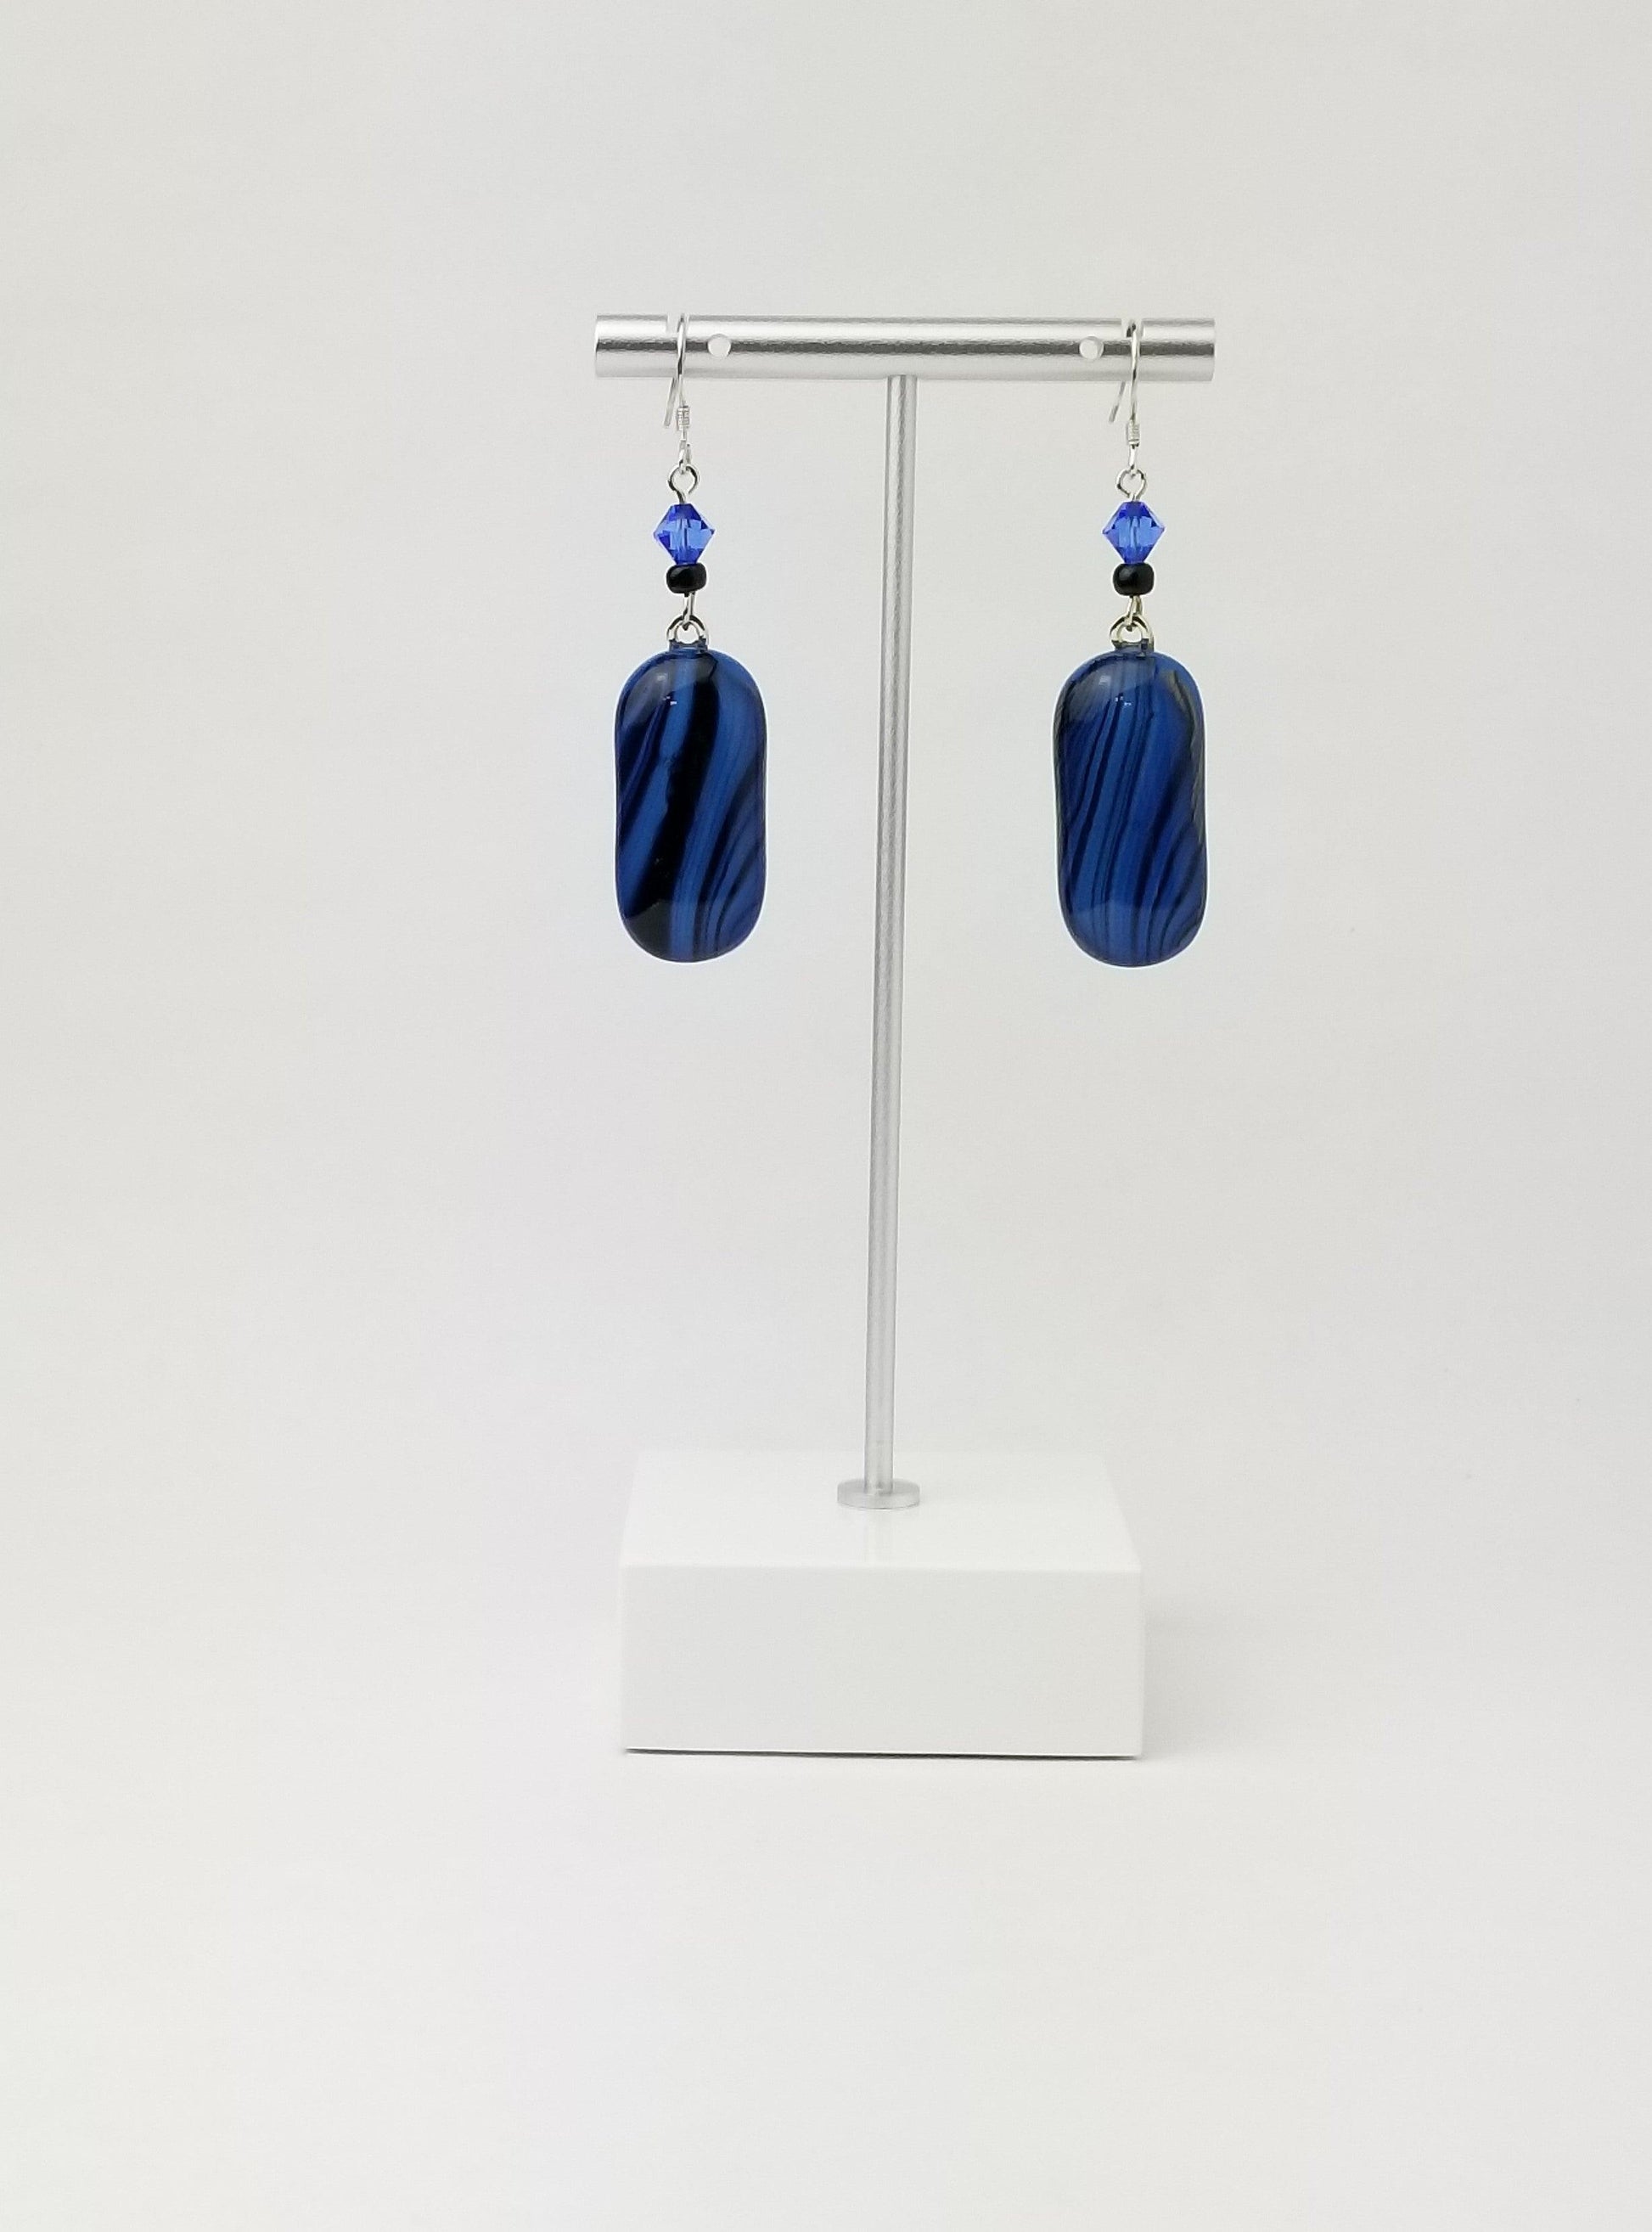 Blue and Black swirled fused glass pierced dangle earring with sterling silver ear wires from seeds glassworks